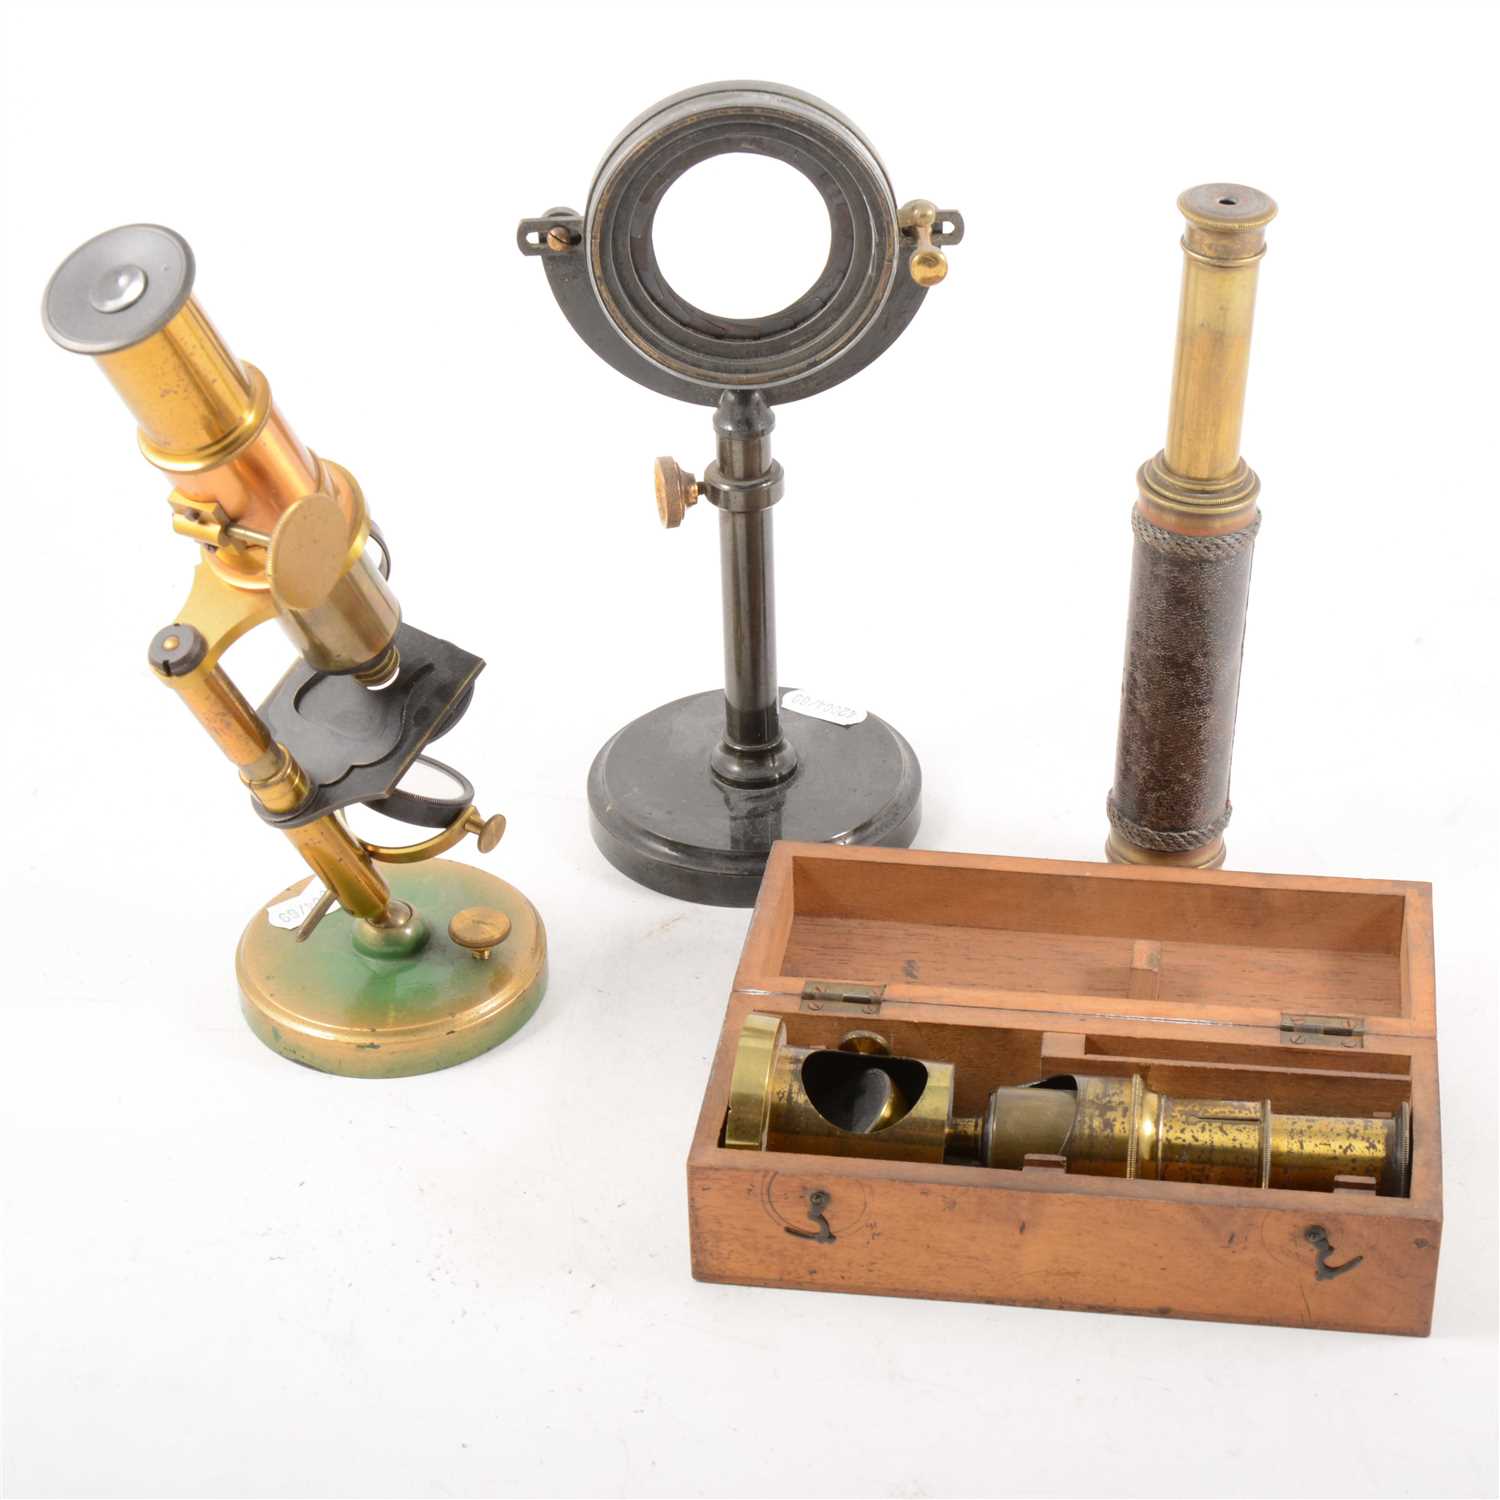 Lot 91 - A lacquered brass student microscope, field microscope, and two telescopes